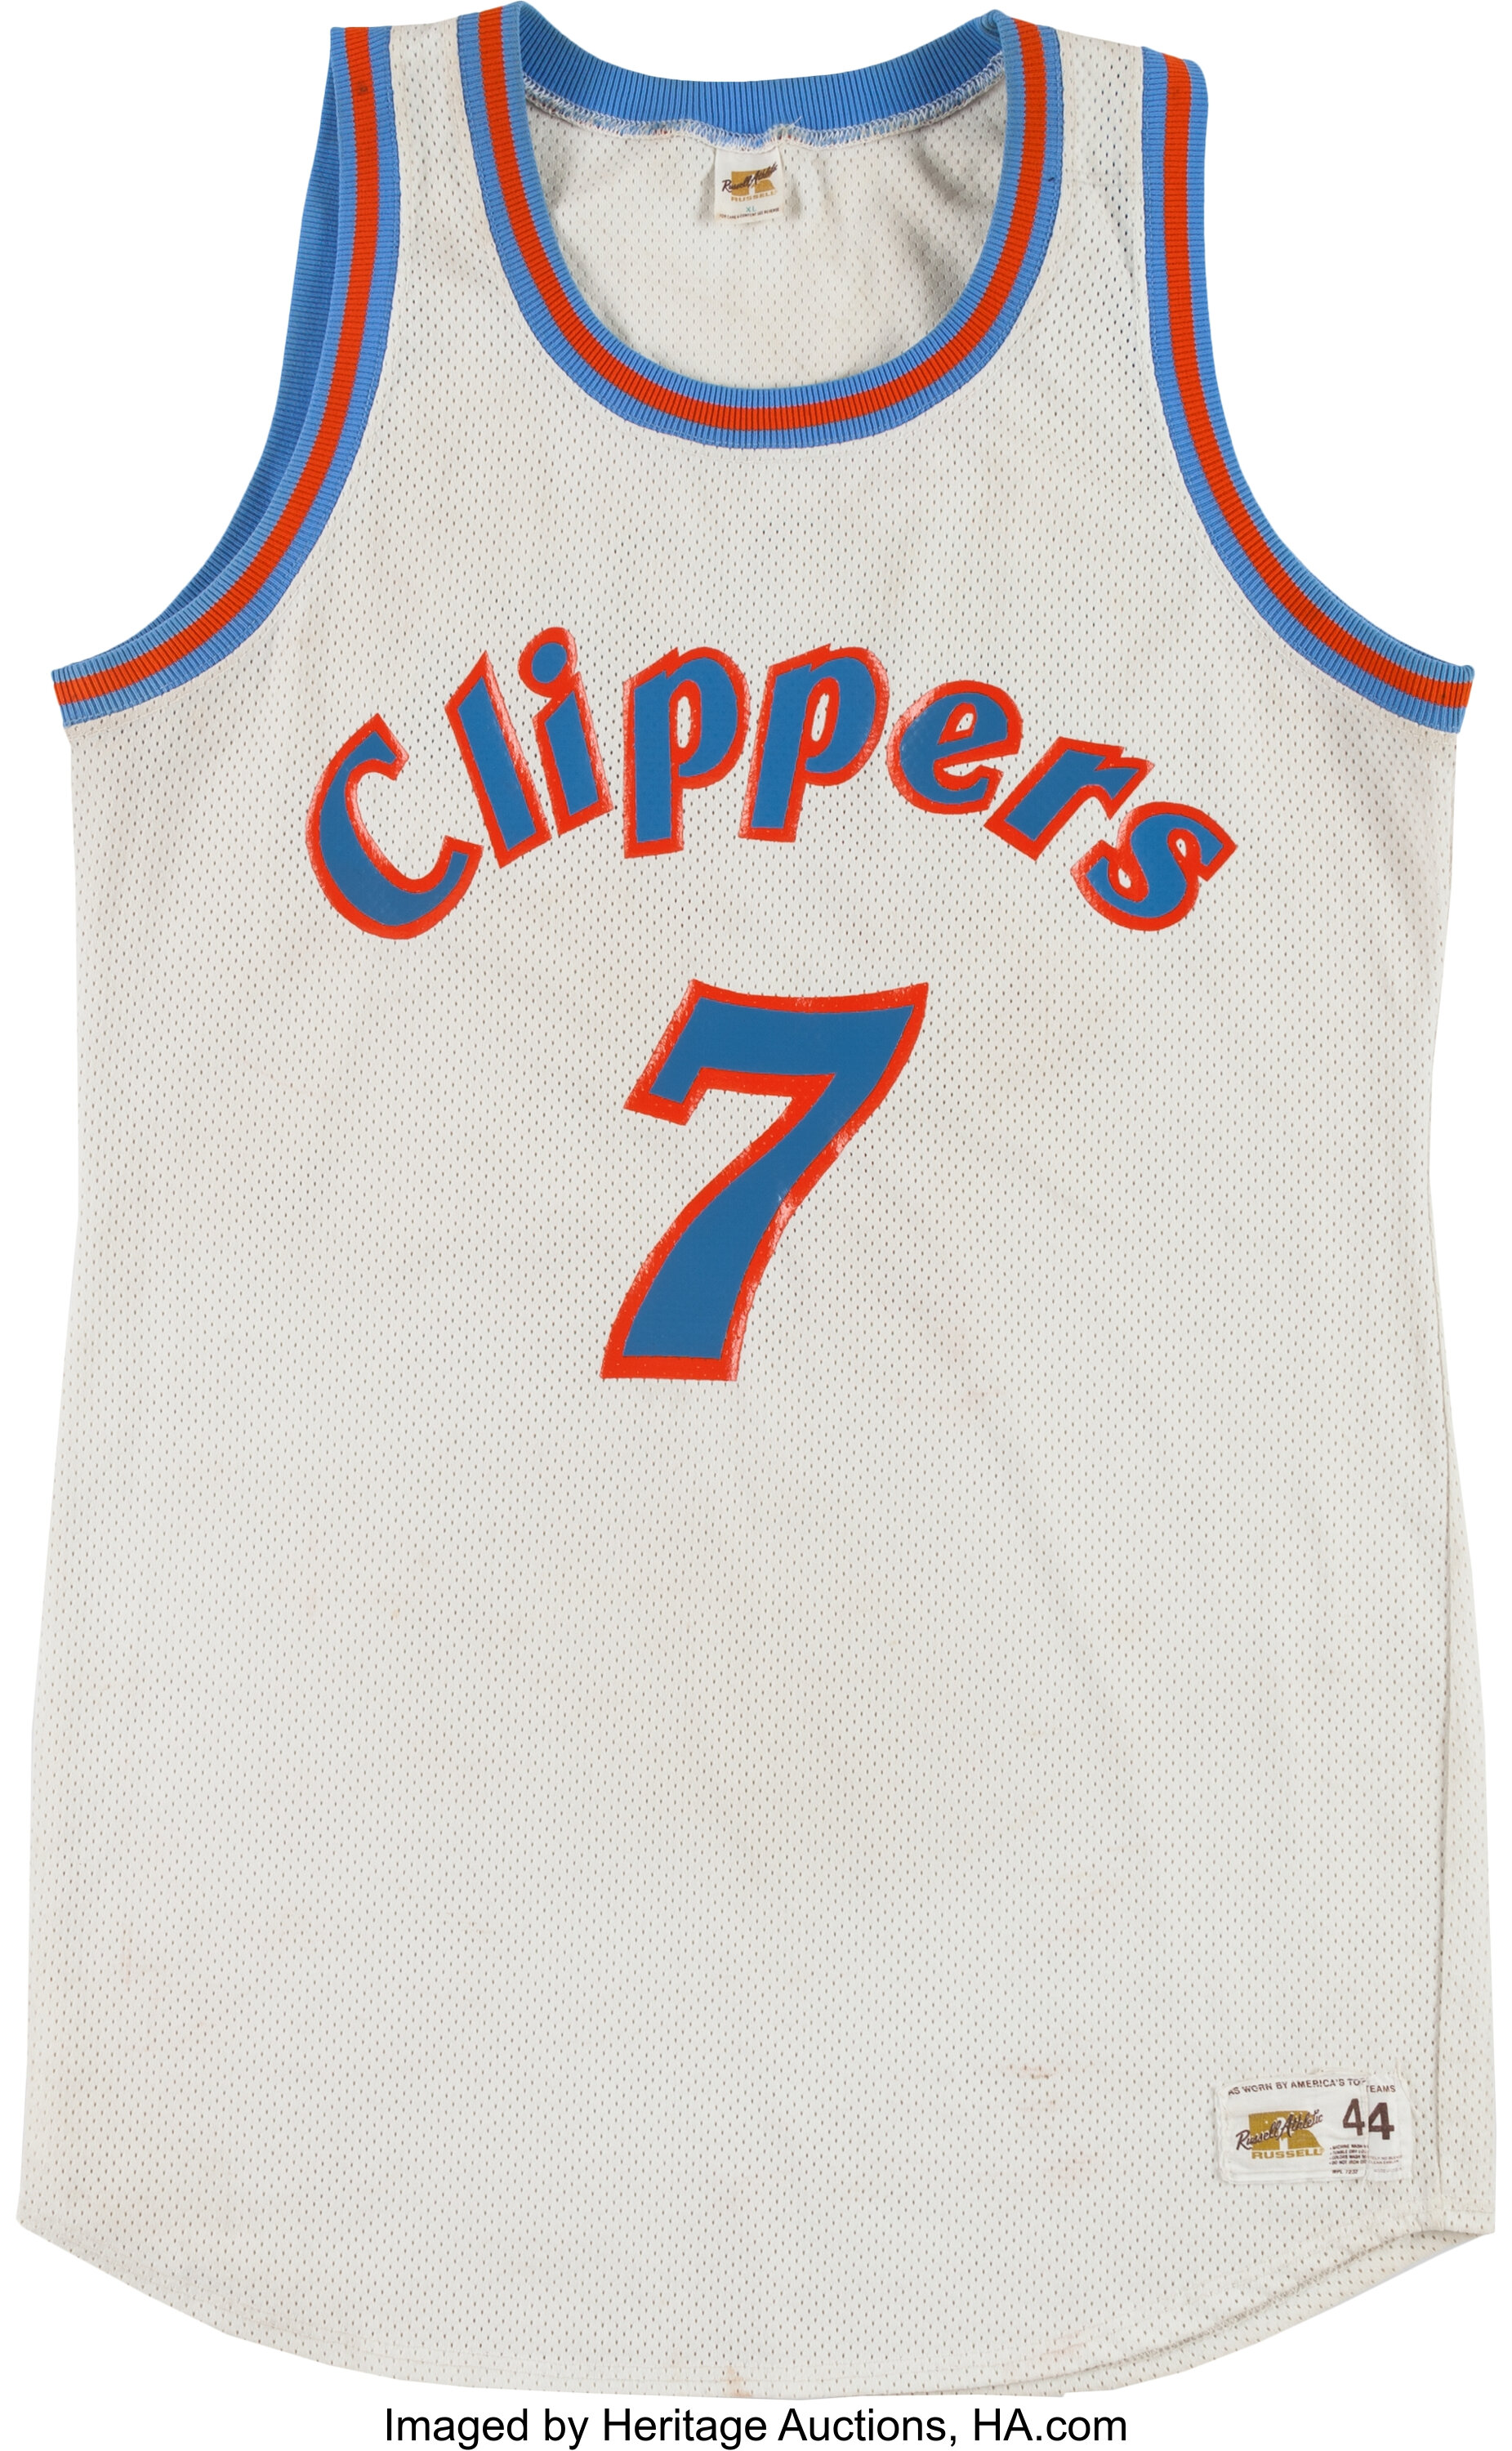 Clippers' new jersey inspired by San Diego era